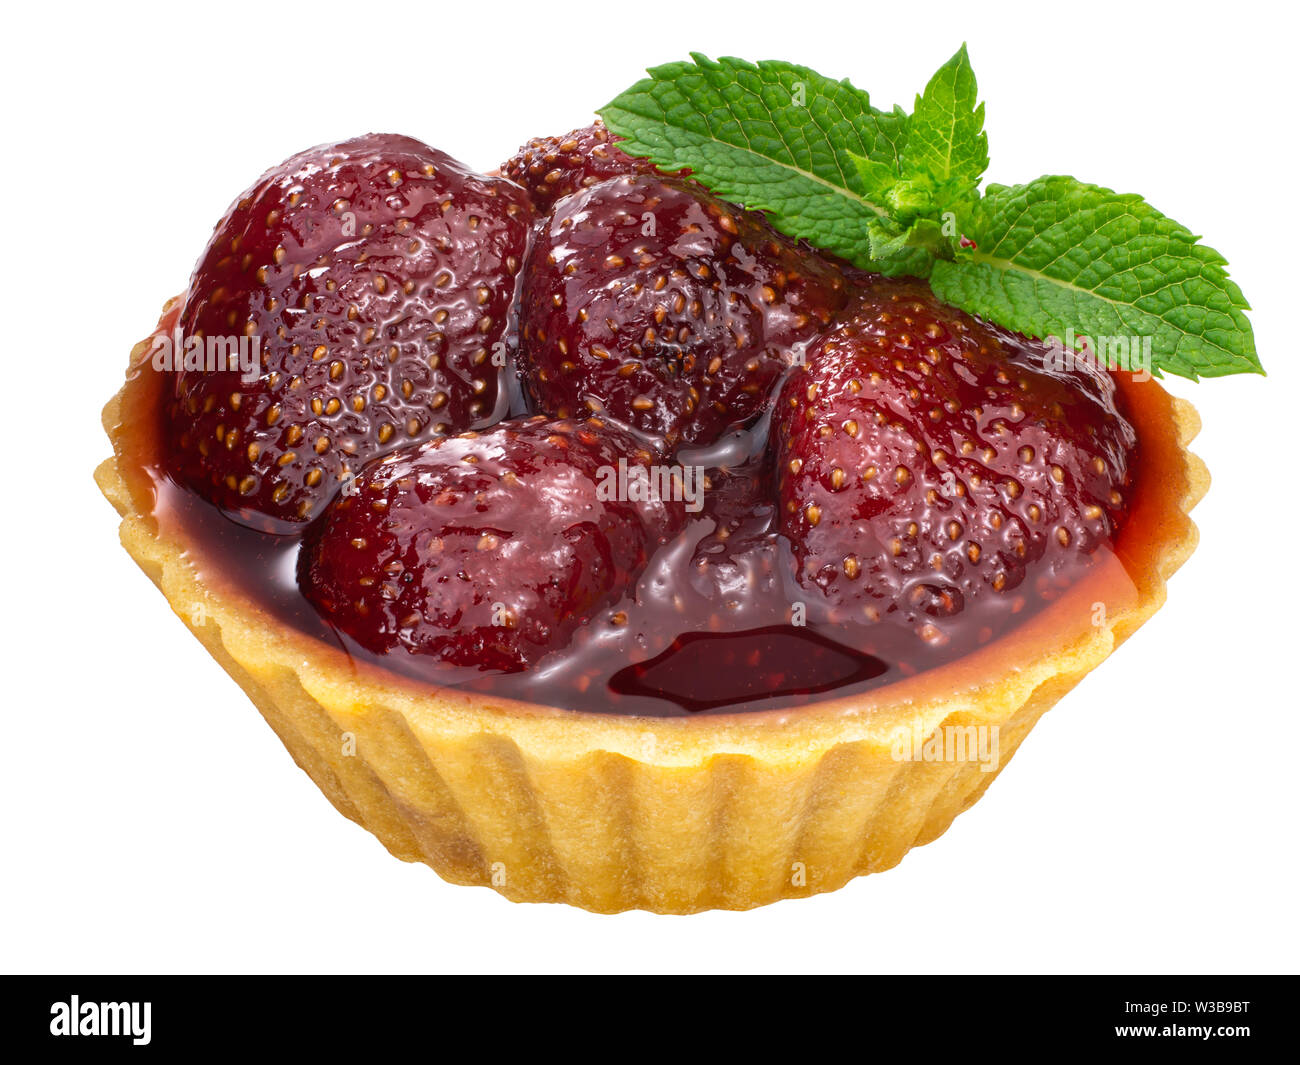 Strawberry jam tart or dessert decorated with mint leaves, isolated Stock Photo